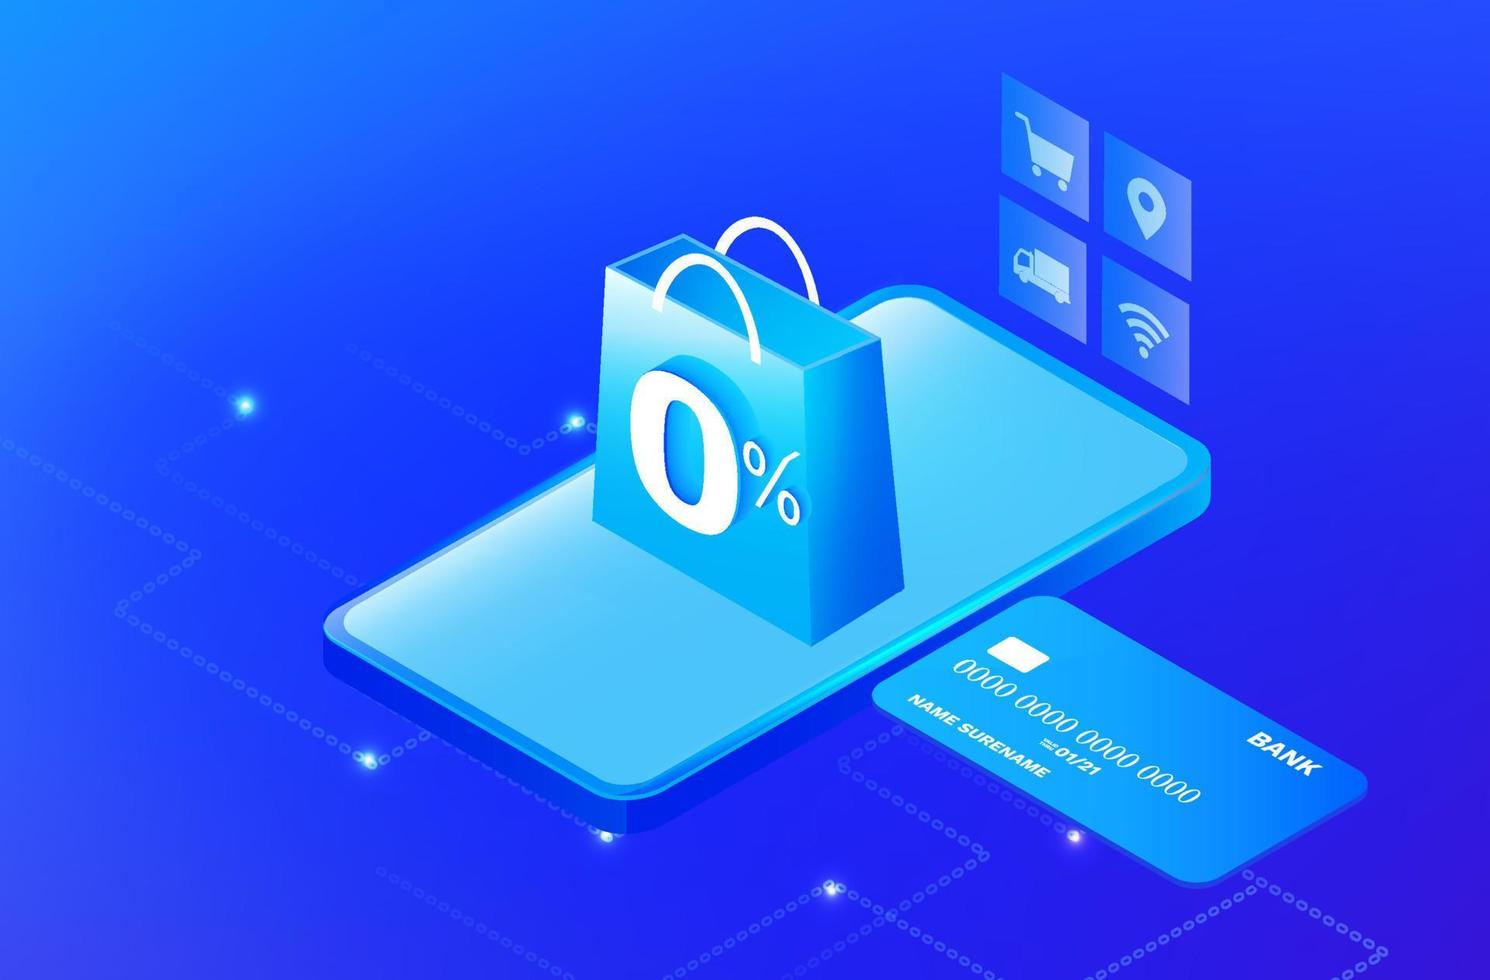 Zero Interest rate free online shopping, zero interest free installation payment on credit card vector illustration. Financial and banking e-commerce for online shopping concept